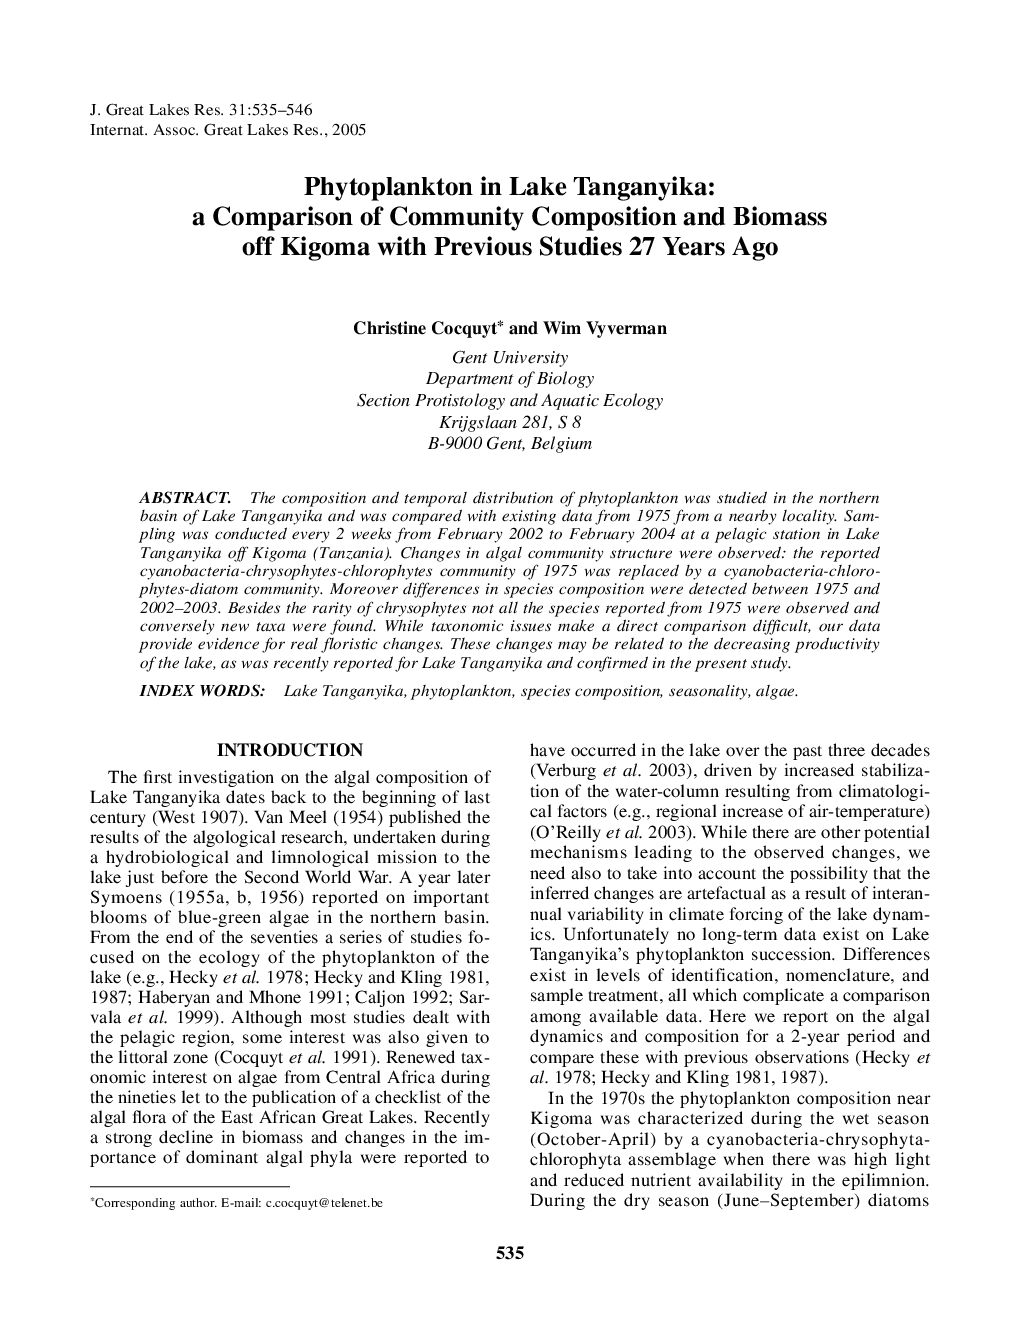 Phytoplankton in Lake Tanganyika: a Comparison of Community Composition and Biomass off Kigoma with Previous Studies 27 Years Ago